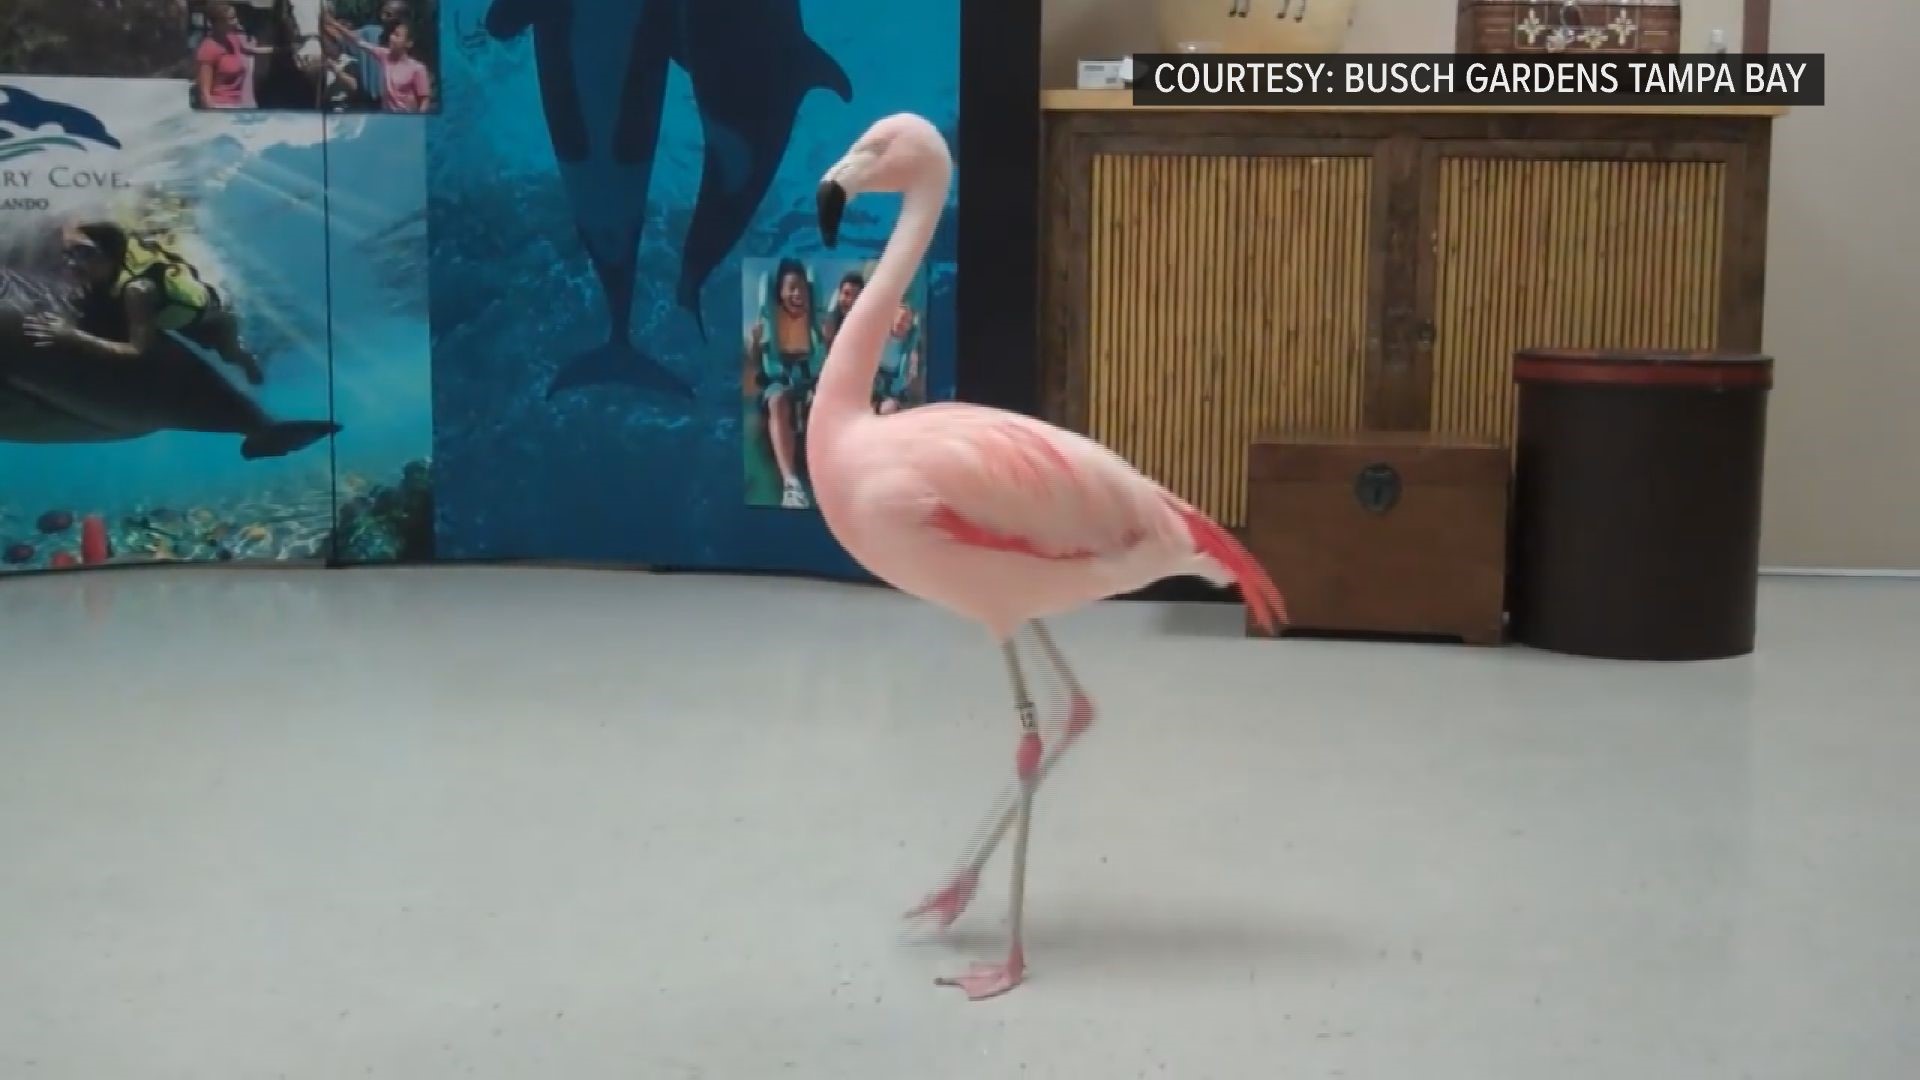 Pinky the Flamingo is seen dancing at Busch Gardens Tampa Bay in 2011. Joseph Carrao allegedly reached into her pen in August 2016, grabbed the bird and slammed her to the ground. Her injuries were so severe that they led to her death. In early June 2019, Carrao was hit and killed by a truck near his Orlando-area home, according to Florida Highway Patrol.